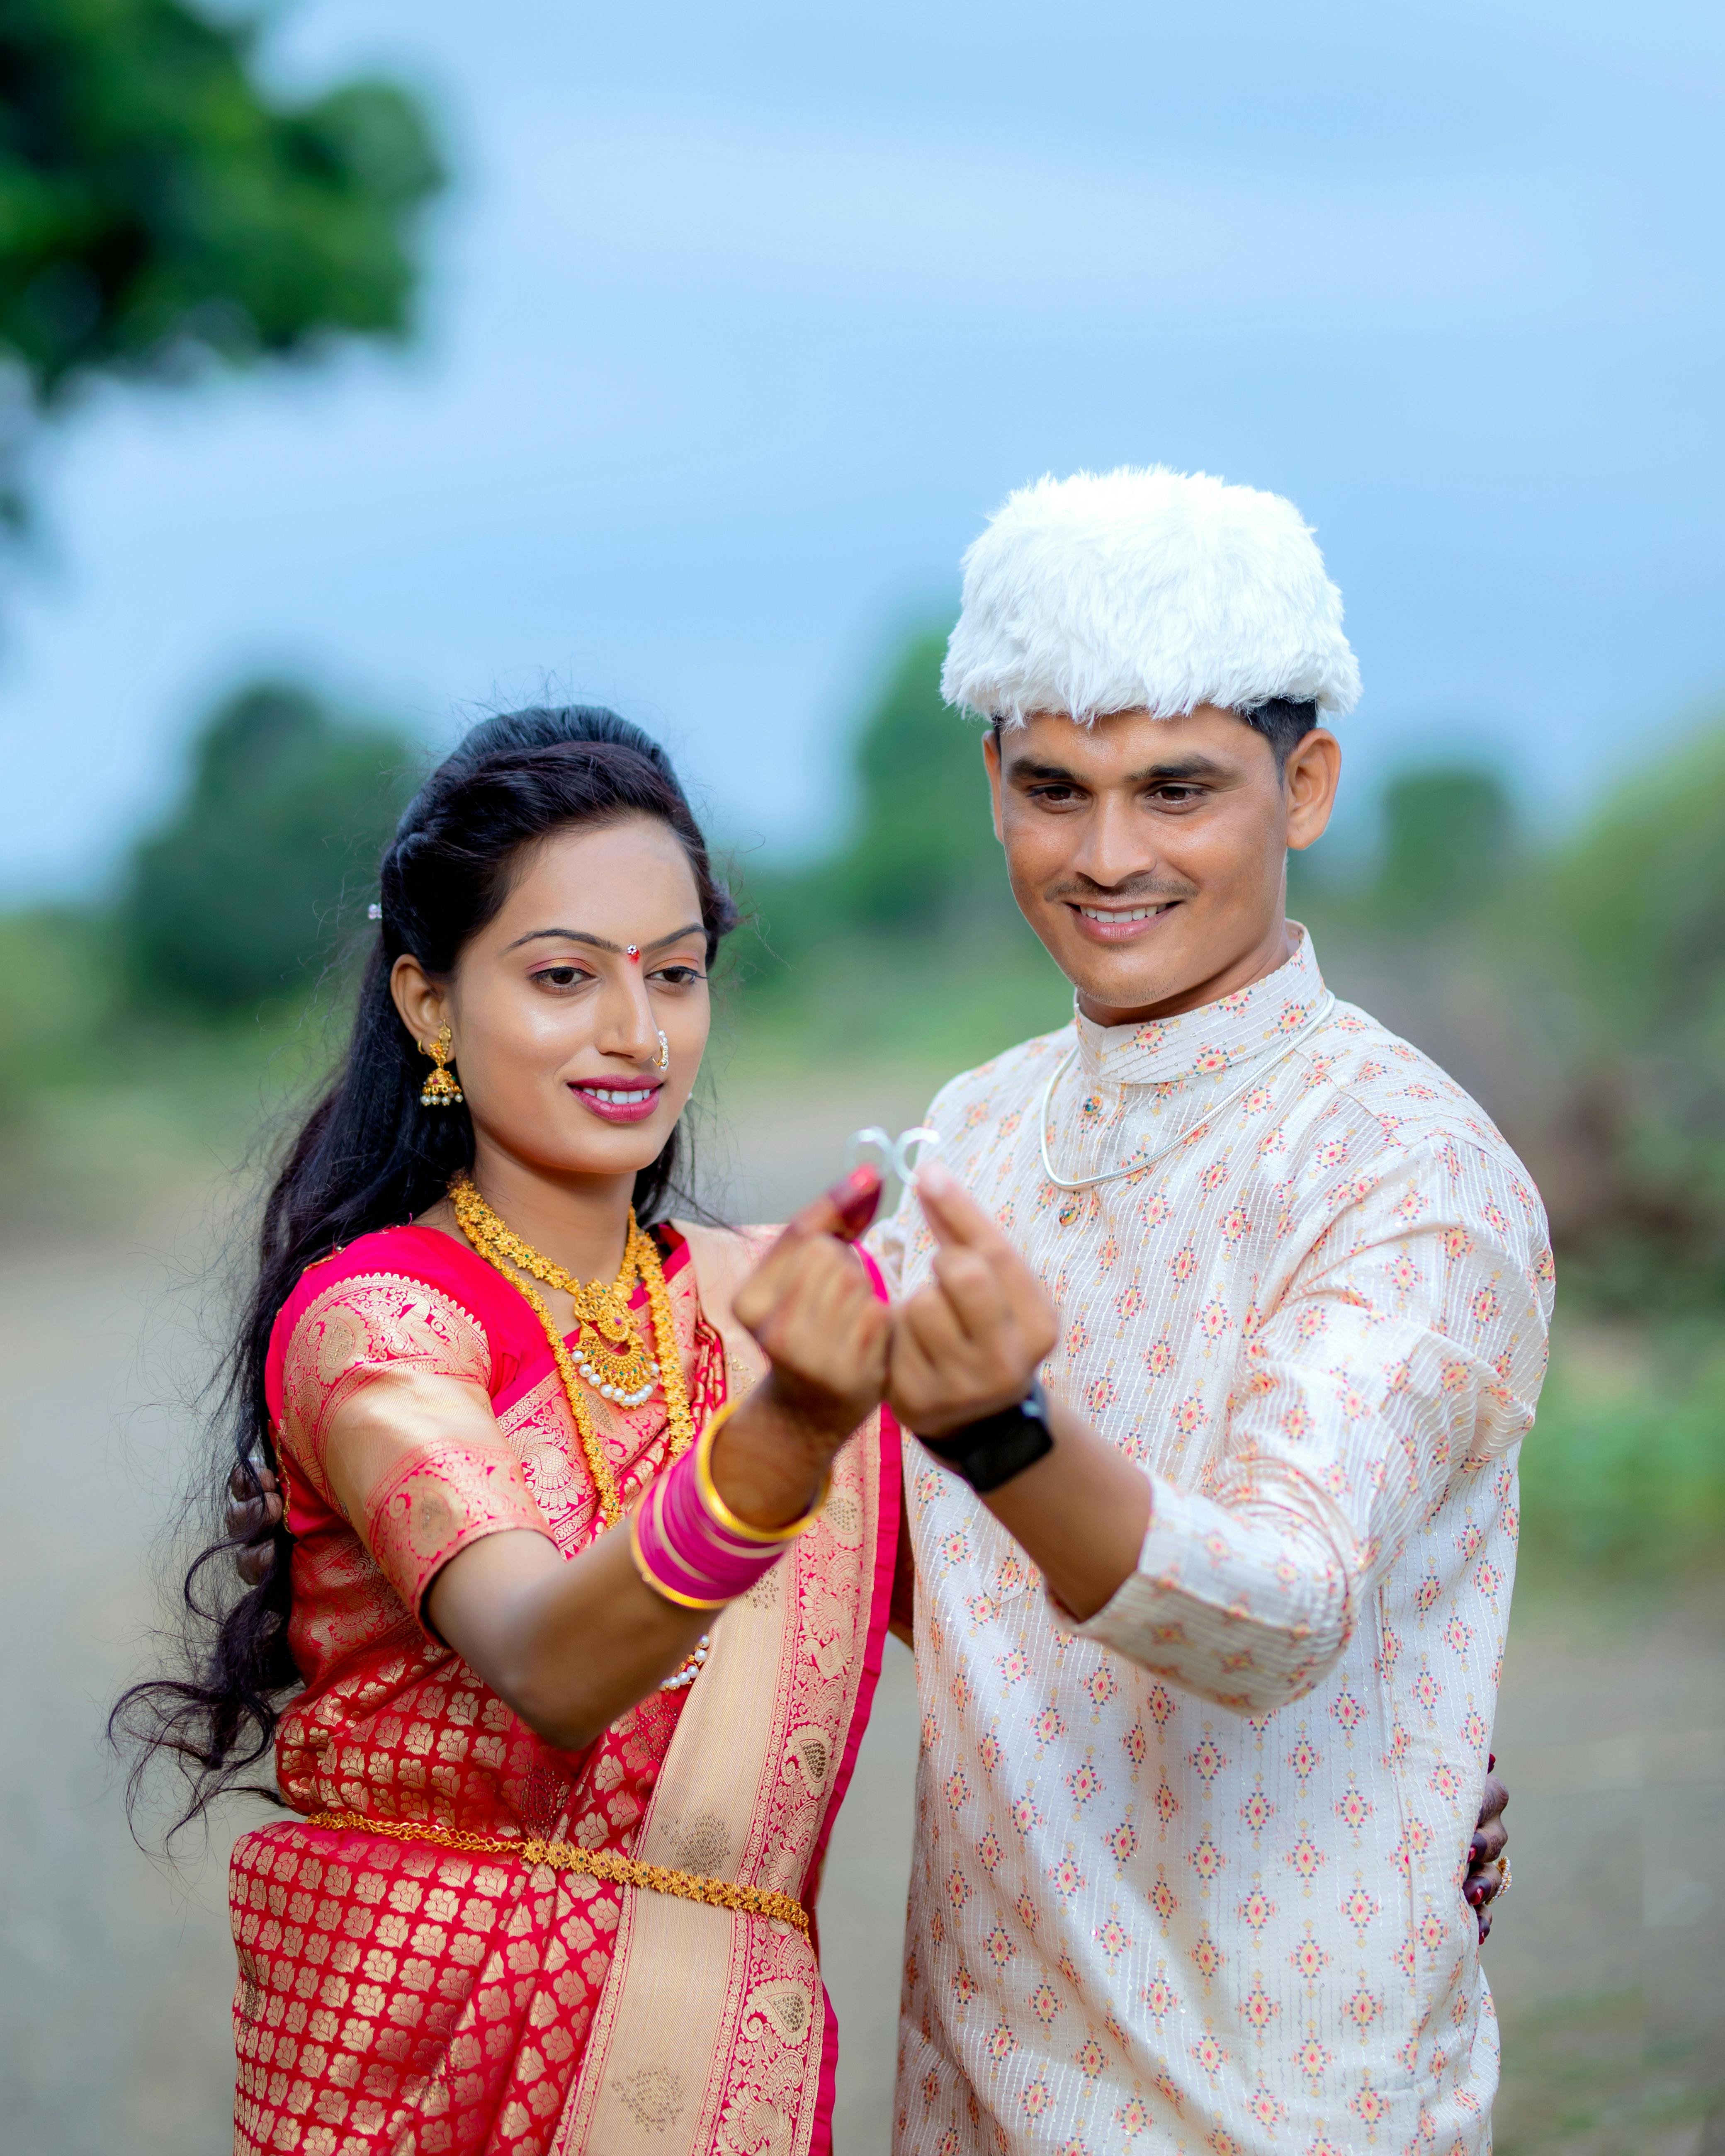 Bengali Wedding - Traditions, Rituals, Ceremony and Dress